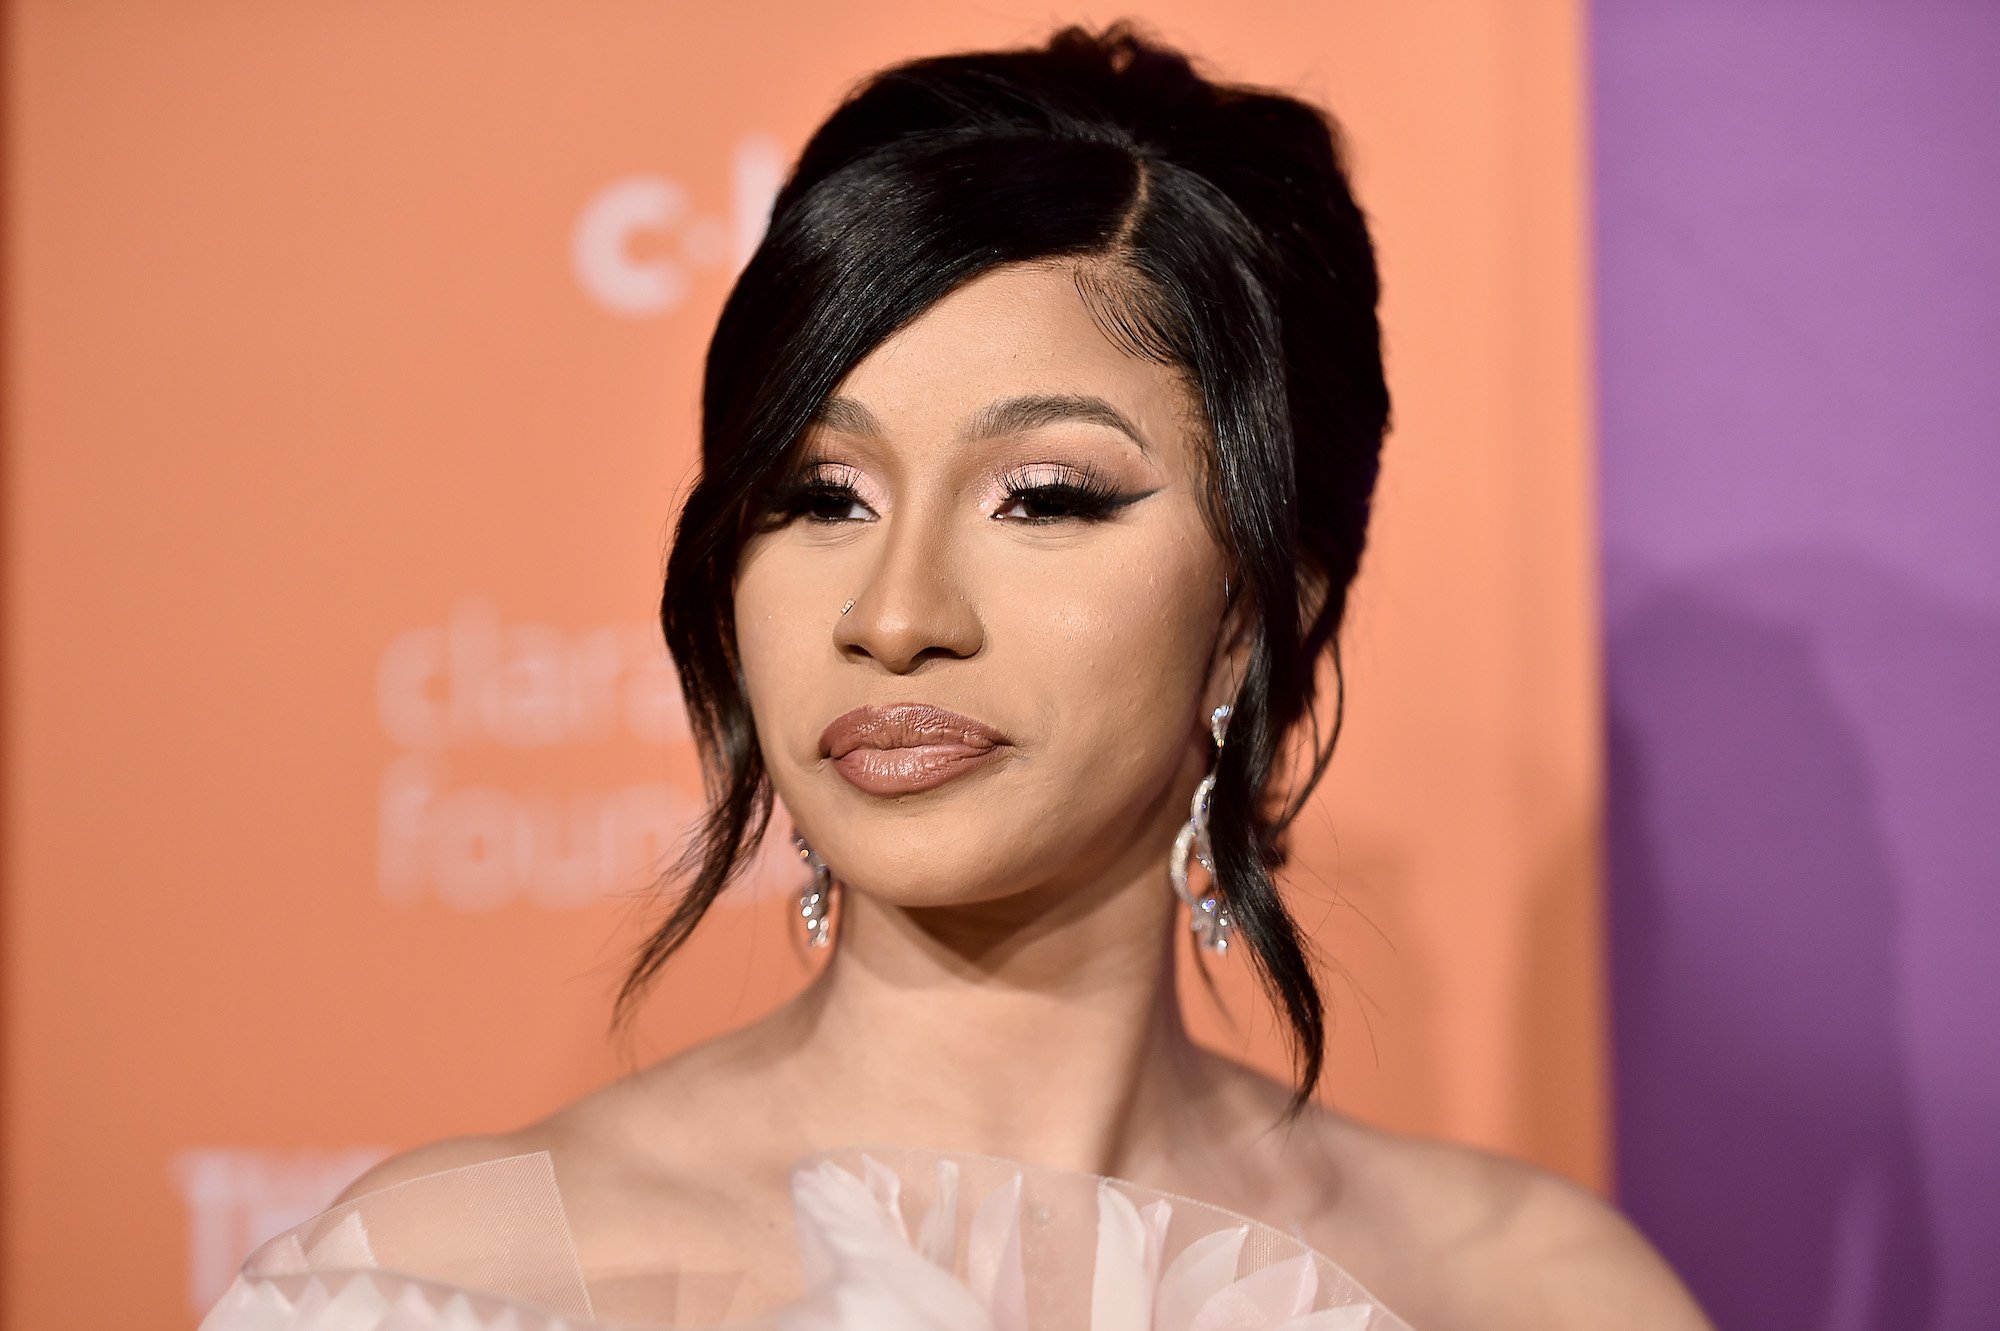 Cardi B smiling in front of an orange and purple background